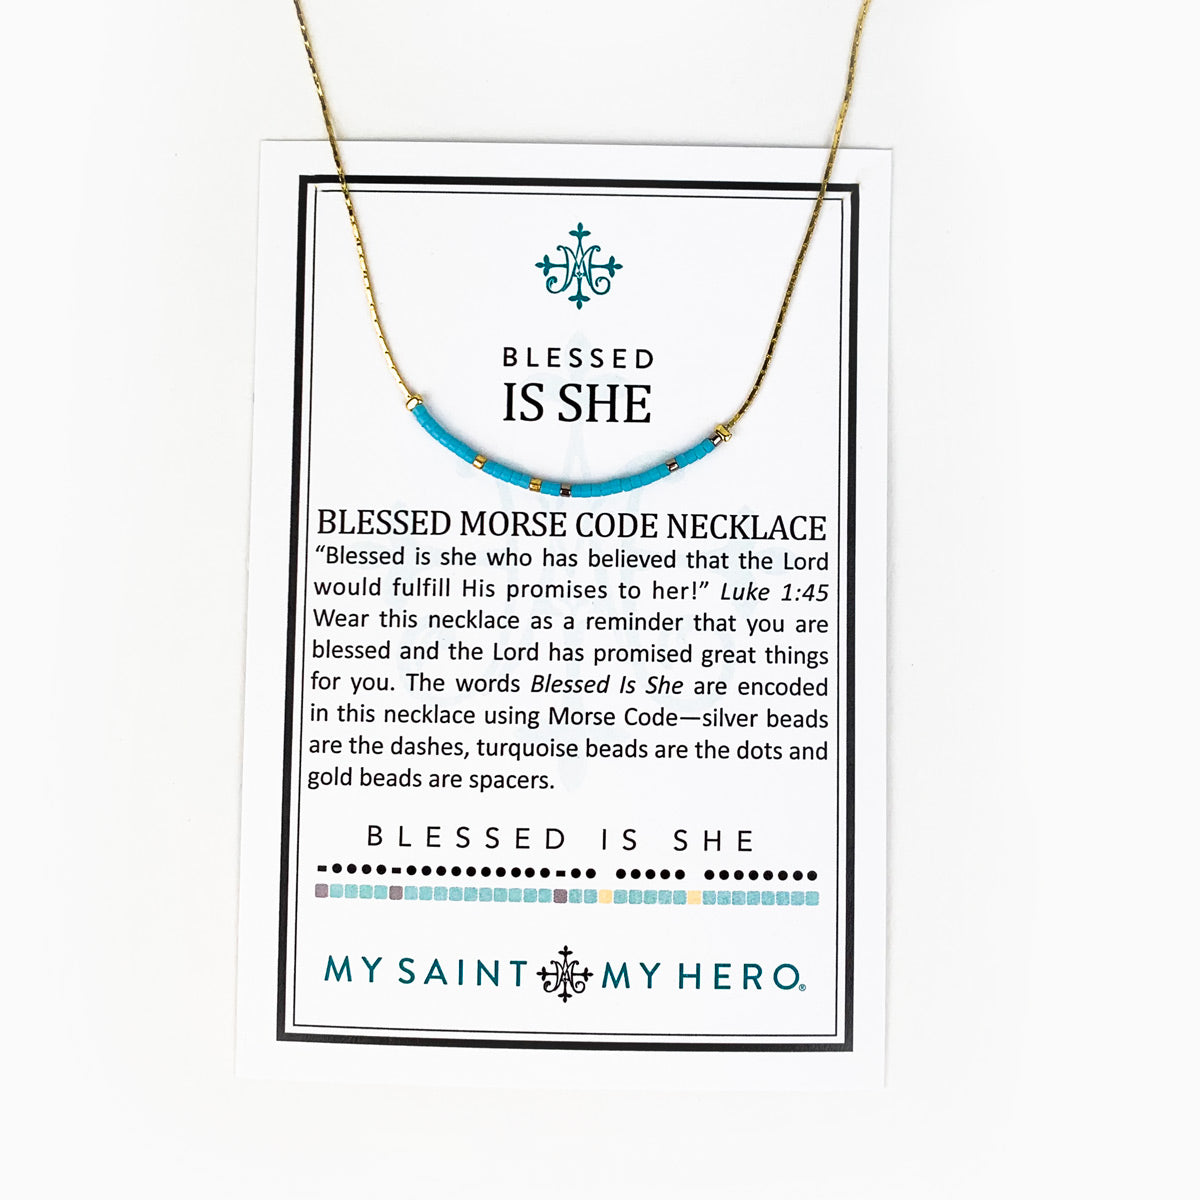 Blessed is She Morse Code Necklace by My Saint My Hero